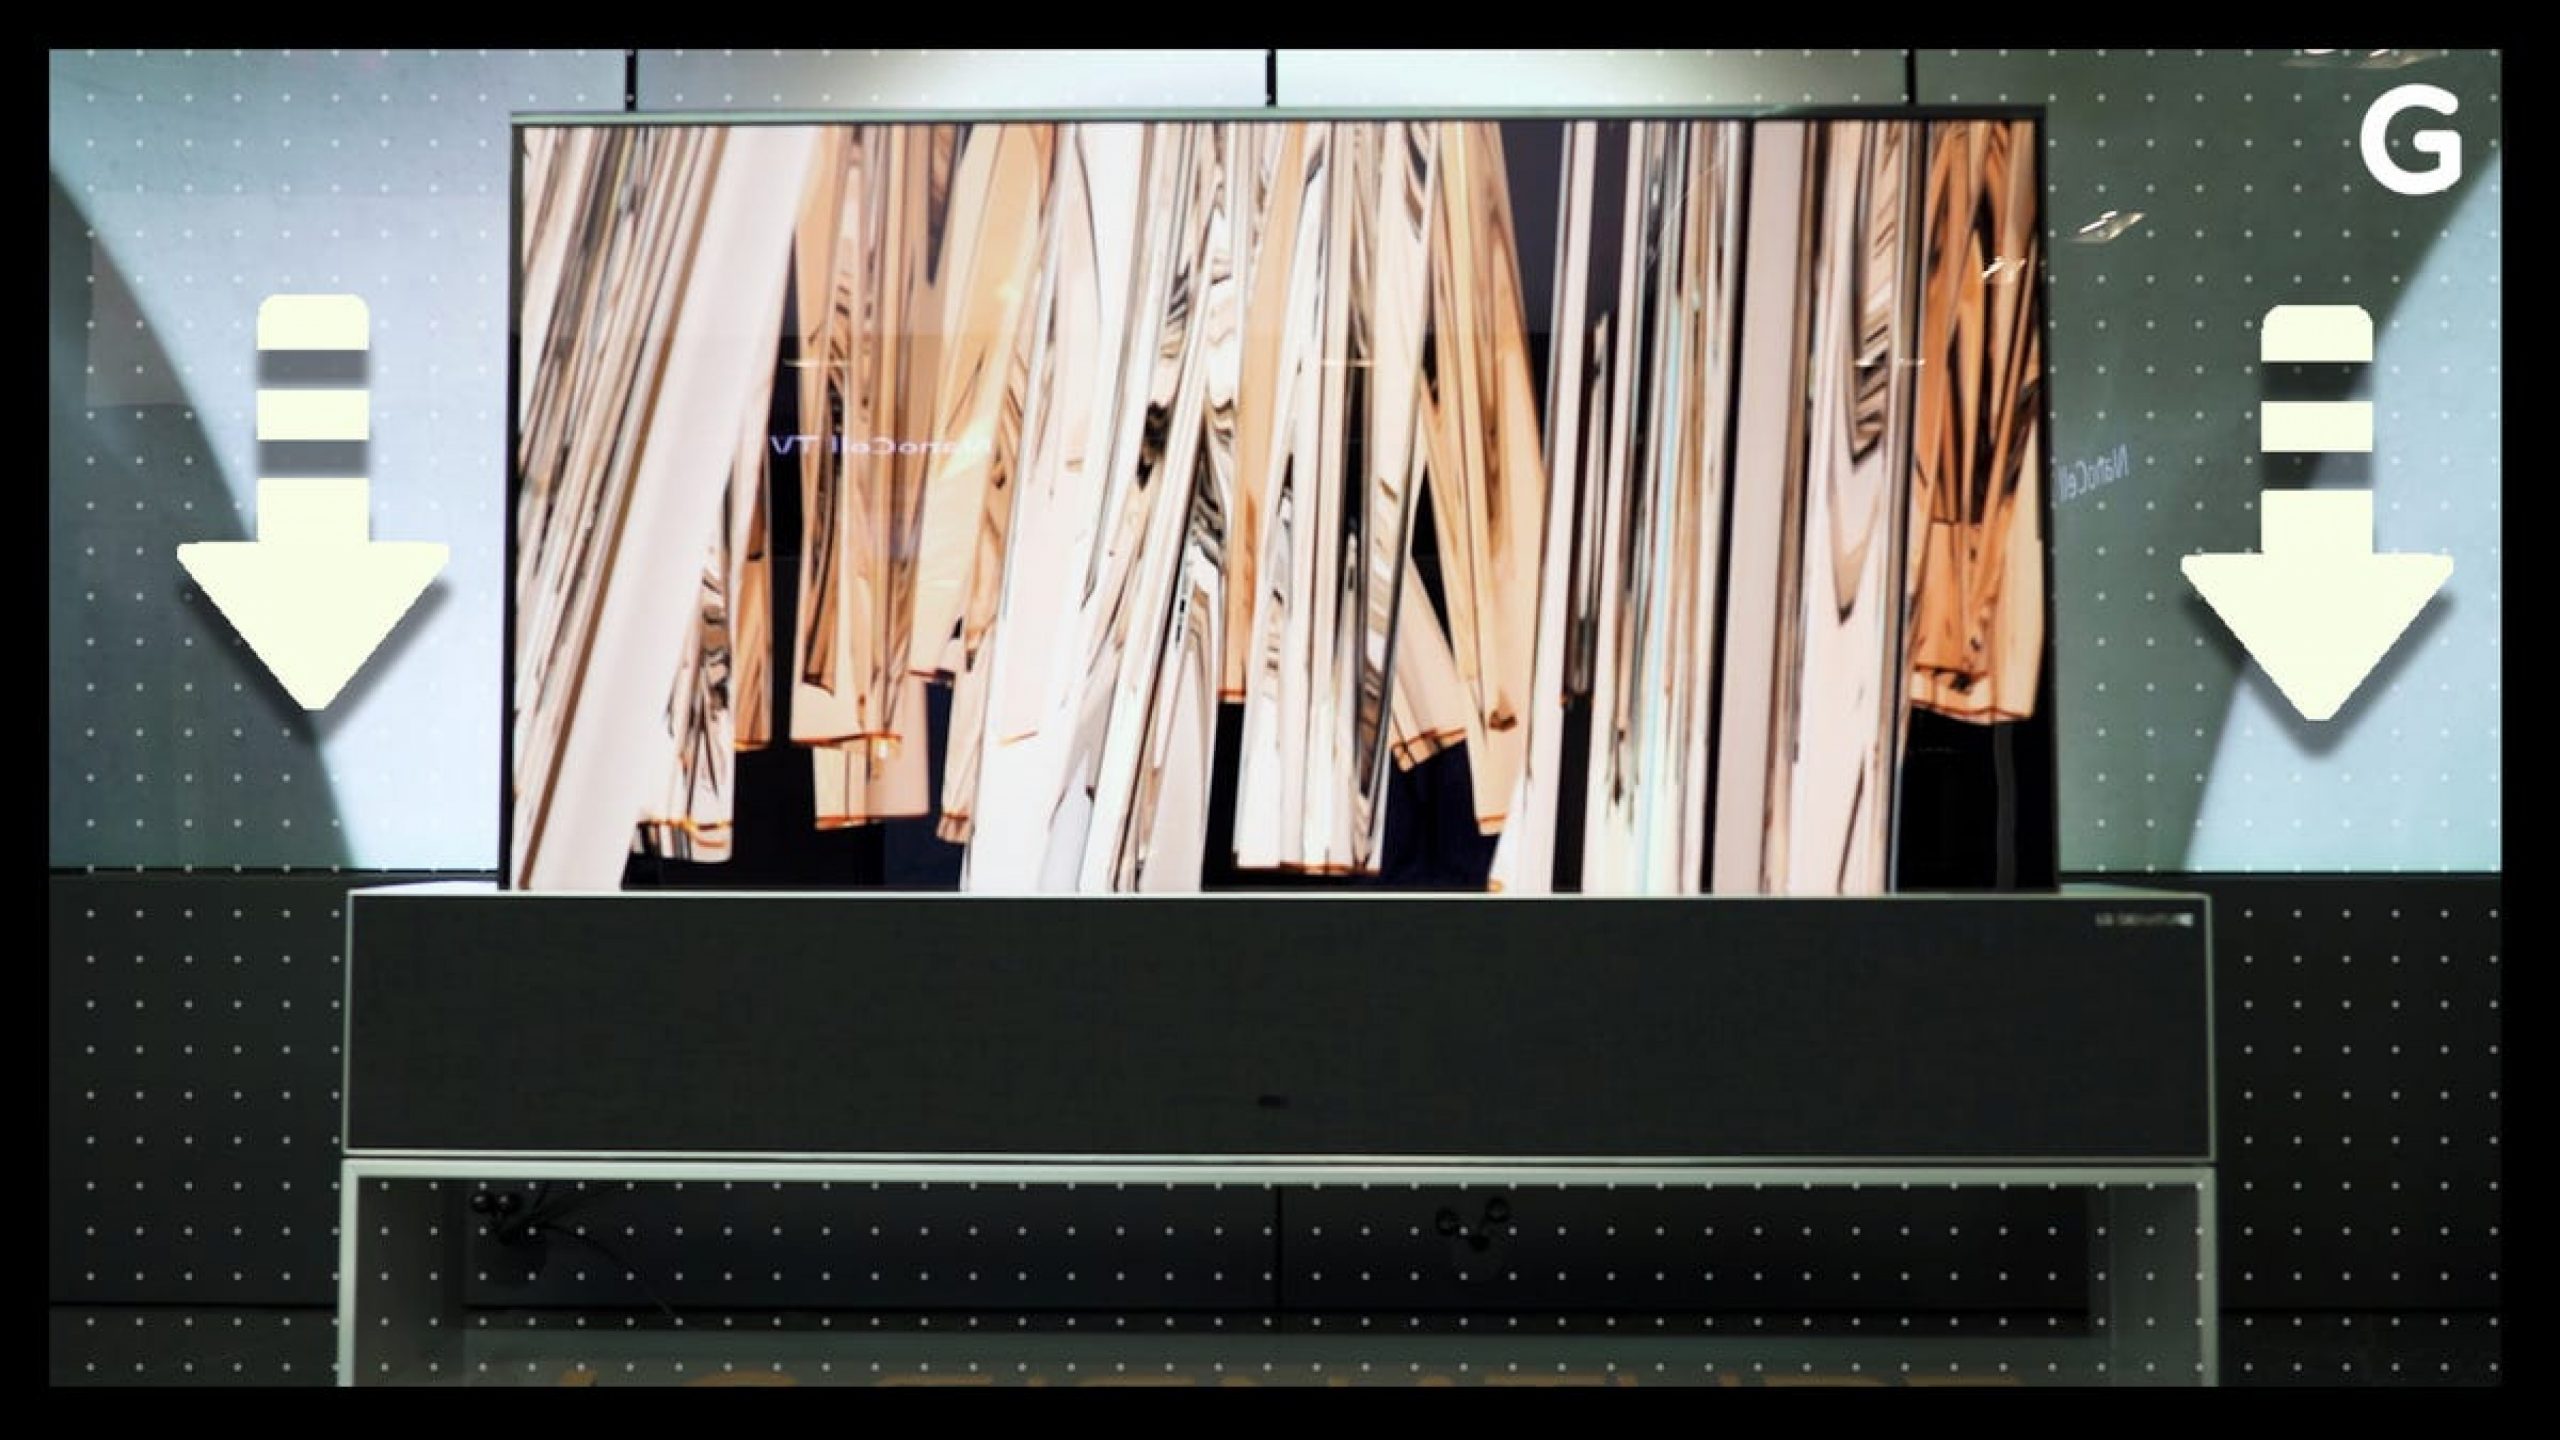 LG’s $100,000 Rollable TV Is So Slick, It Hurts